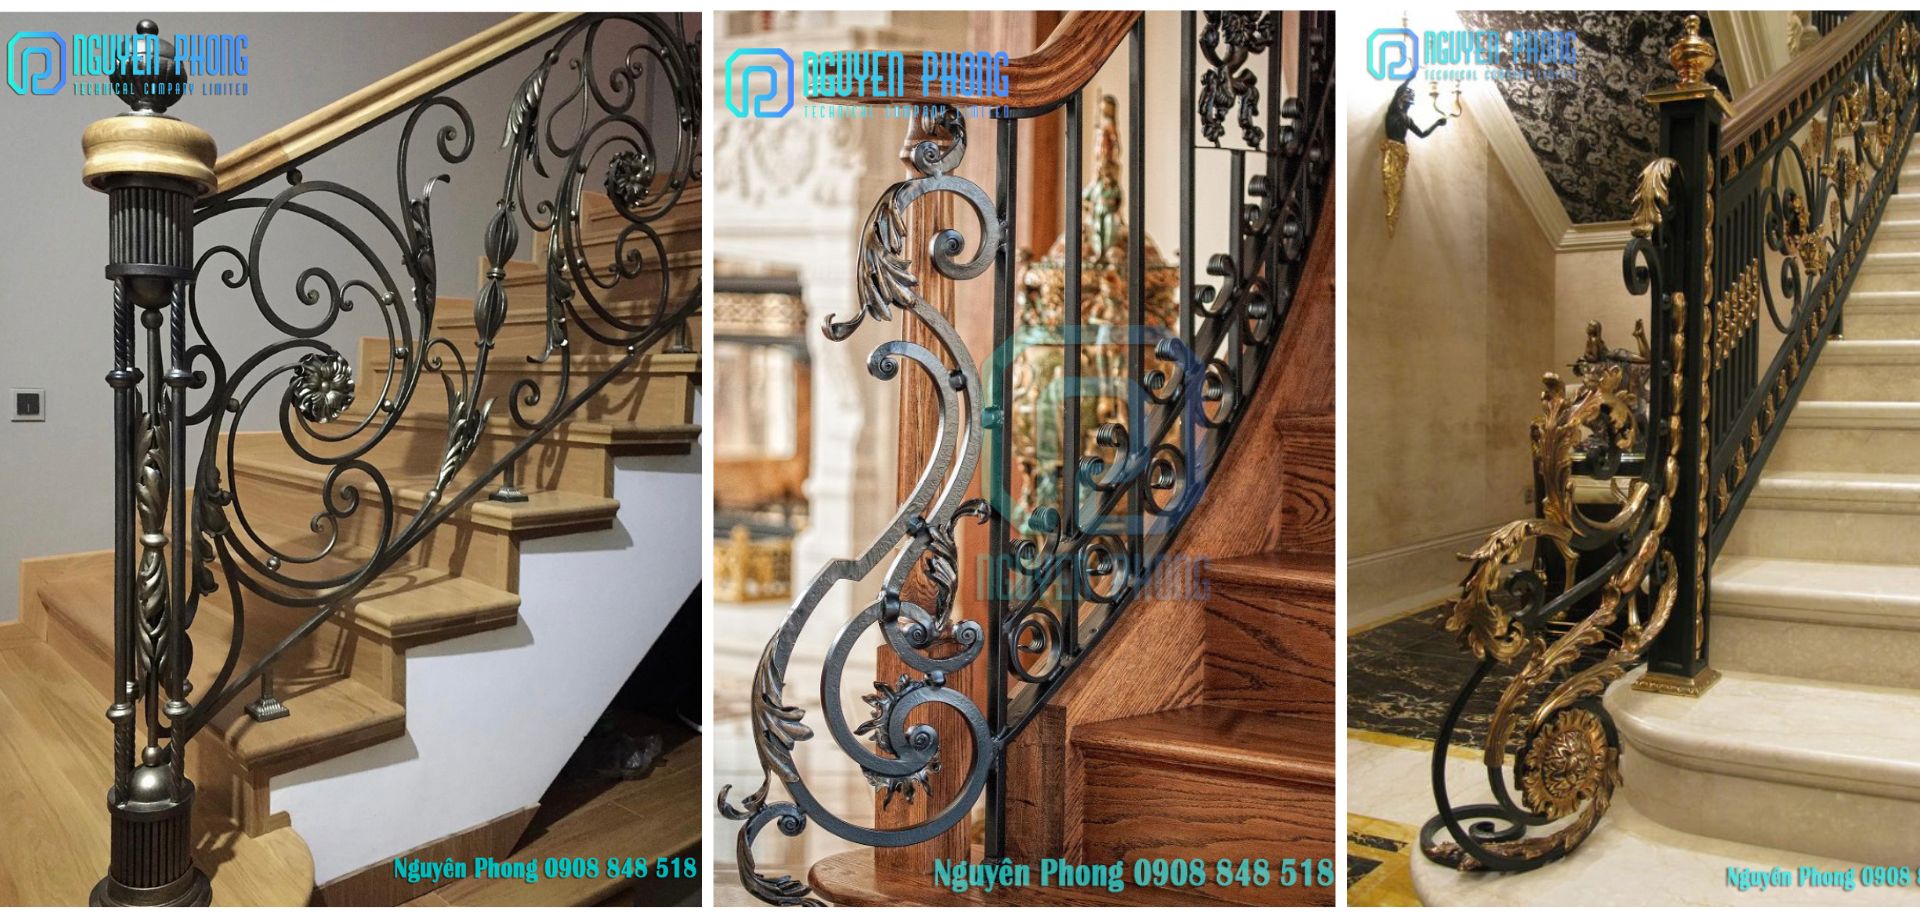 https://www.nguyenphongcnc.com/assets/images/gallery/wrought-iron-stair-railing-stairs-railing-design-staircase-93.jpg